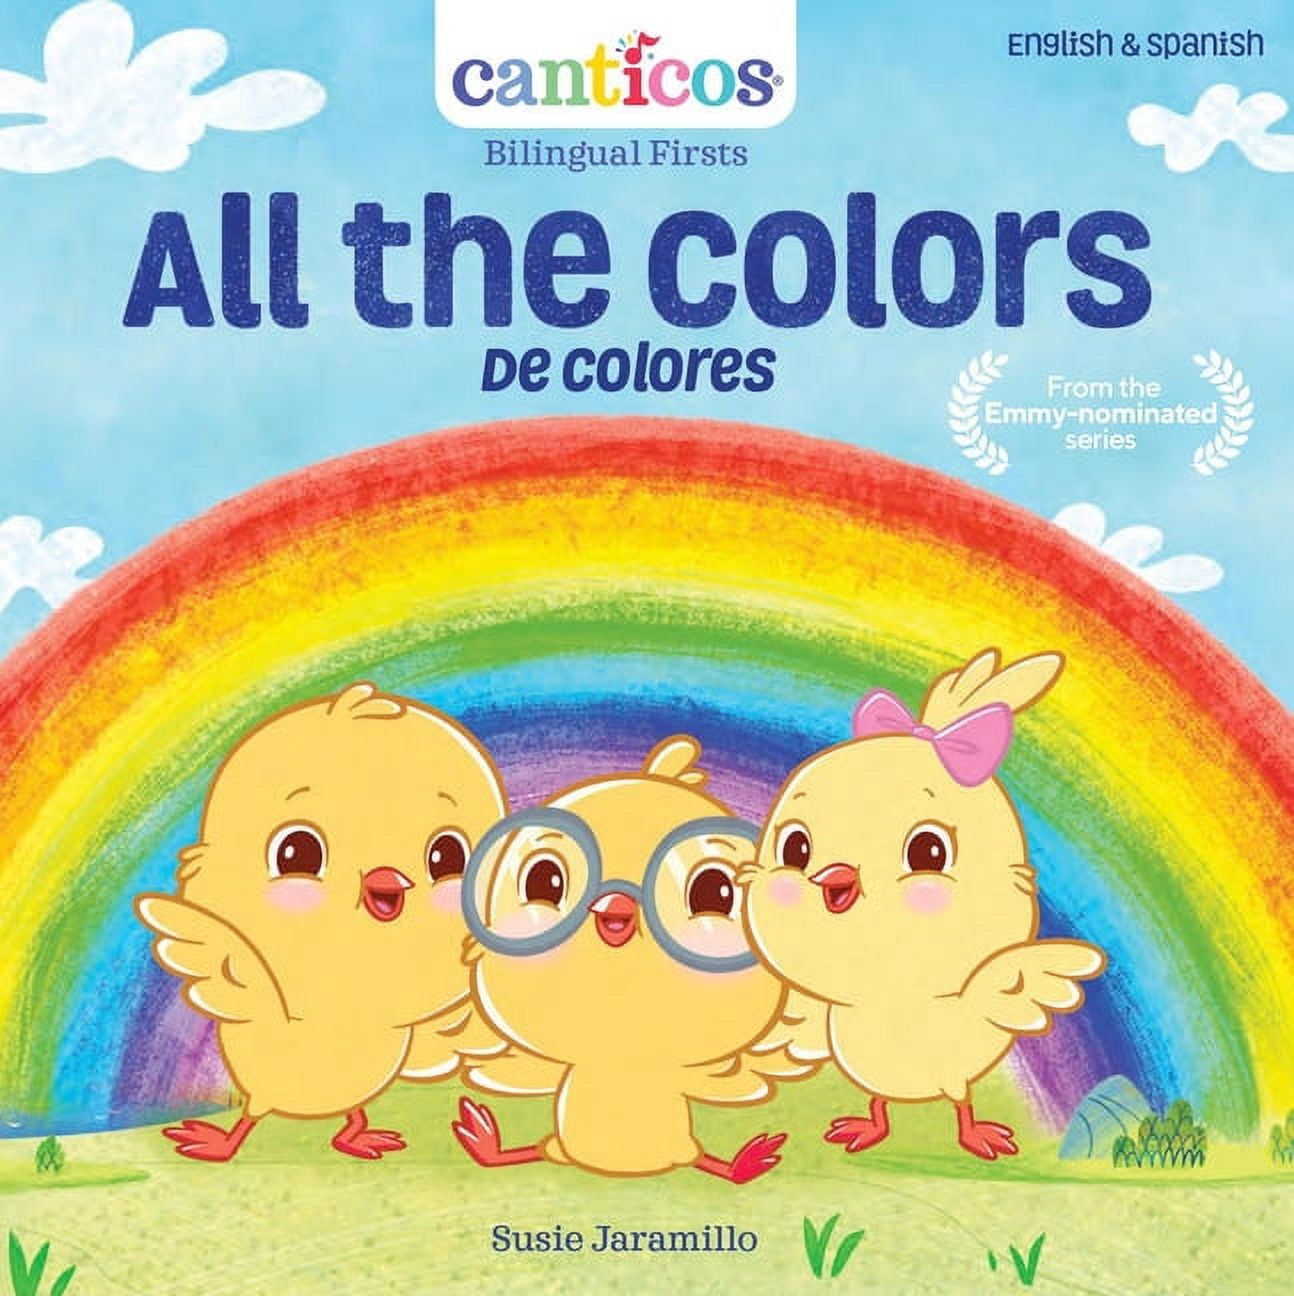 Bilingual Color Books: Creative Color Stories for Kids - Spanish